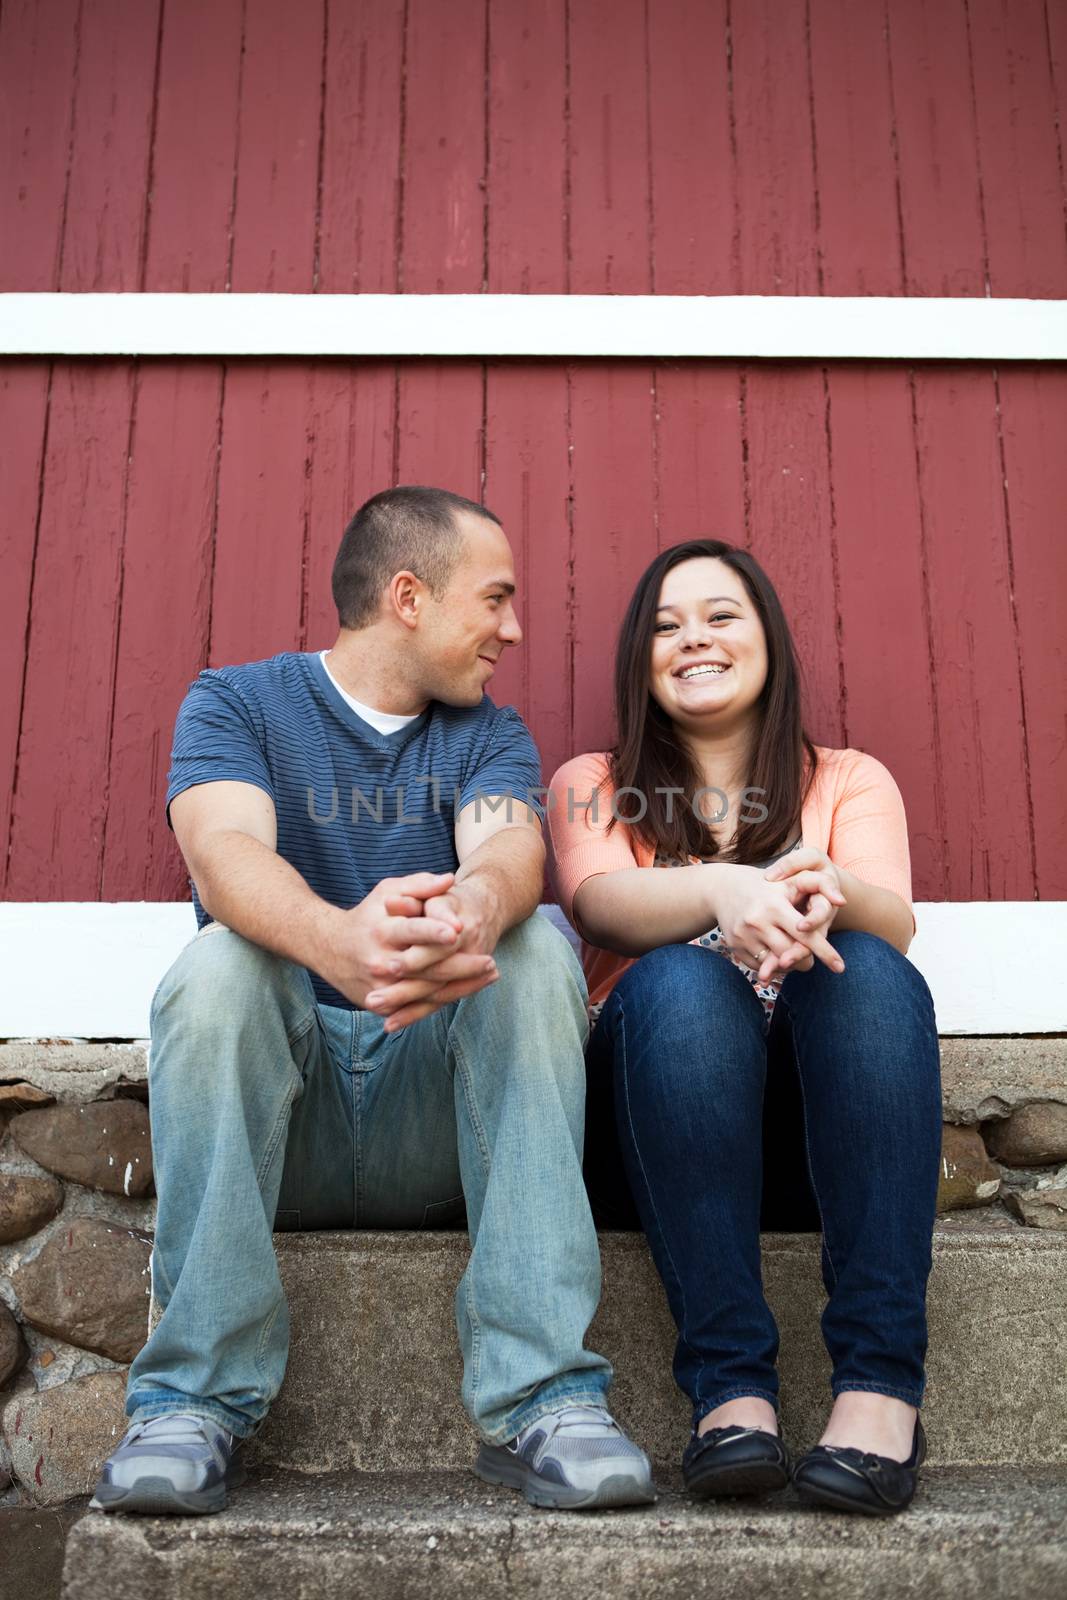 Young happy couple enjoying each others company outdoors.